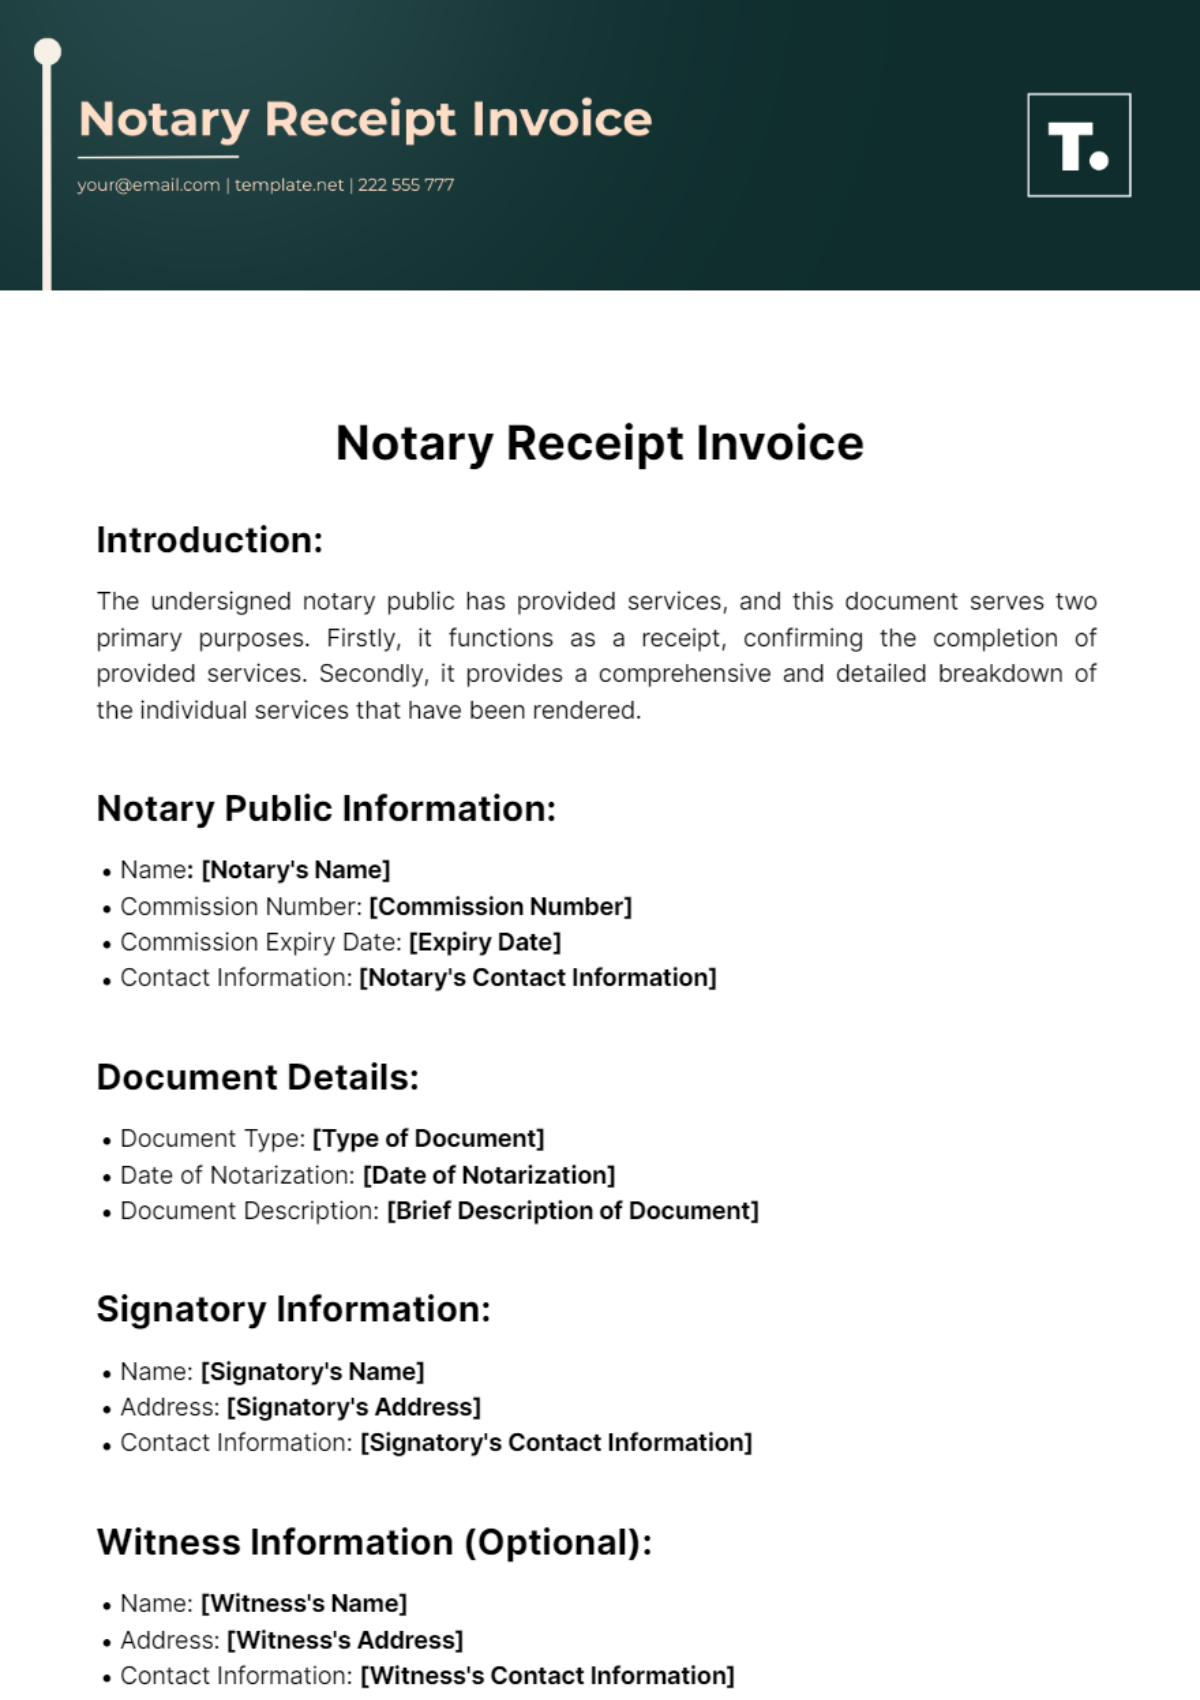 Free Notary Receipt Invoice Template